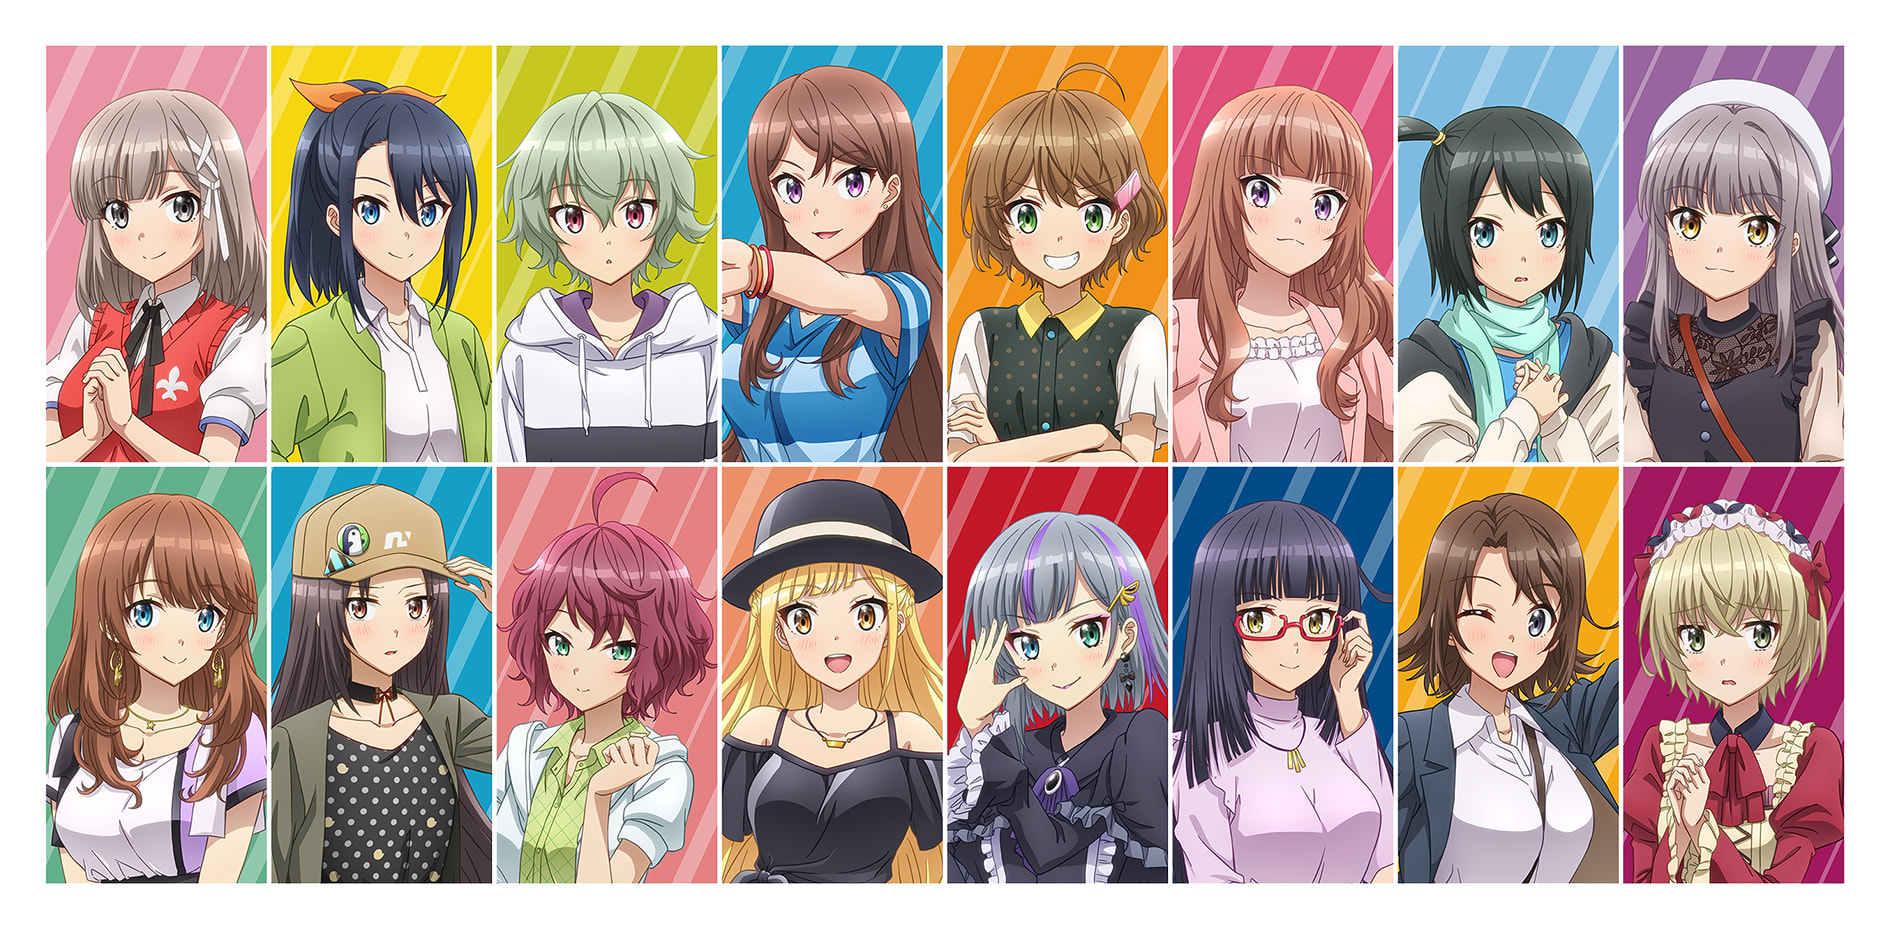 A key visual for the upcoming CUE! TV anime, featuring headshots of the 16 main girls who work as aspiring voice actors.